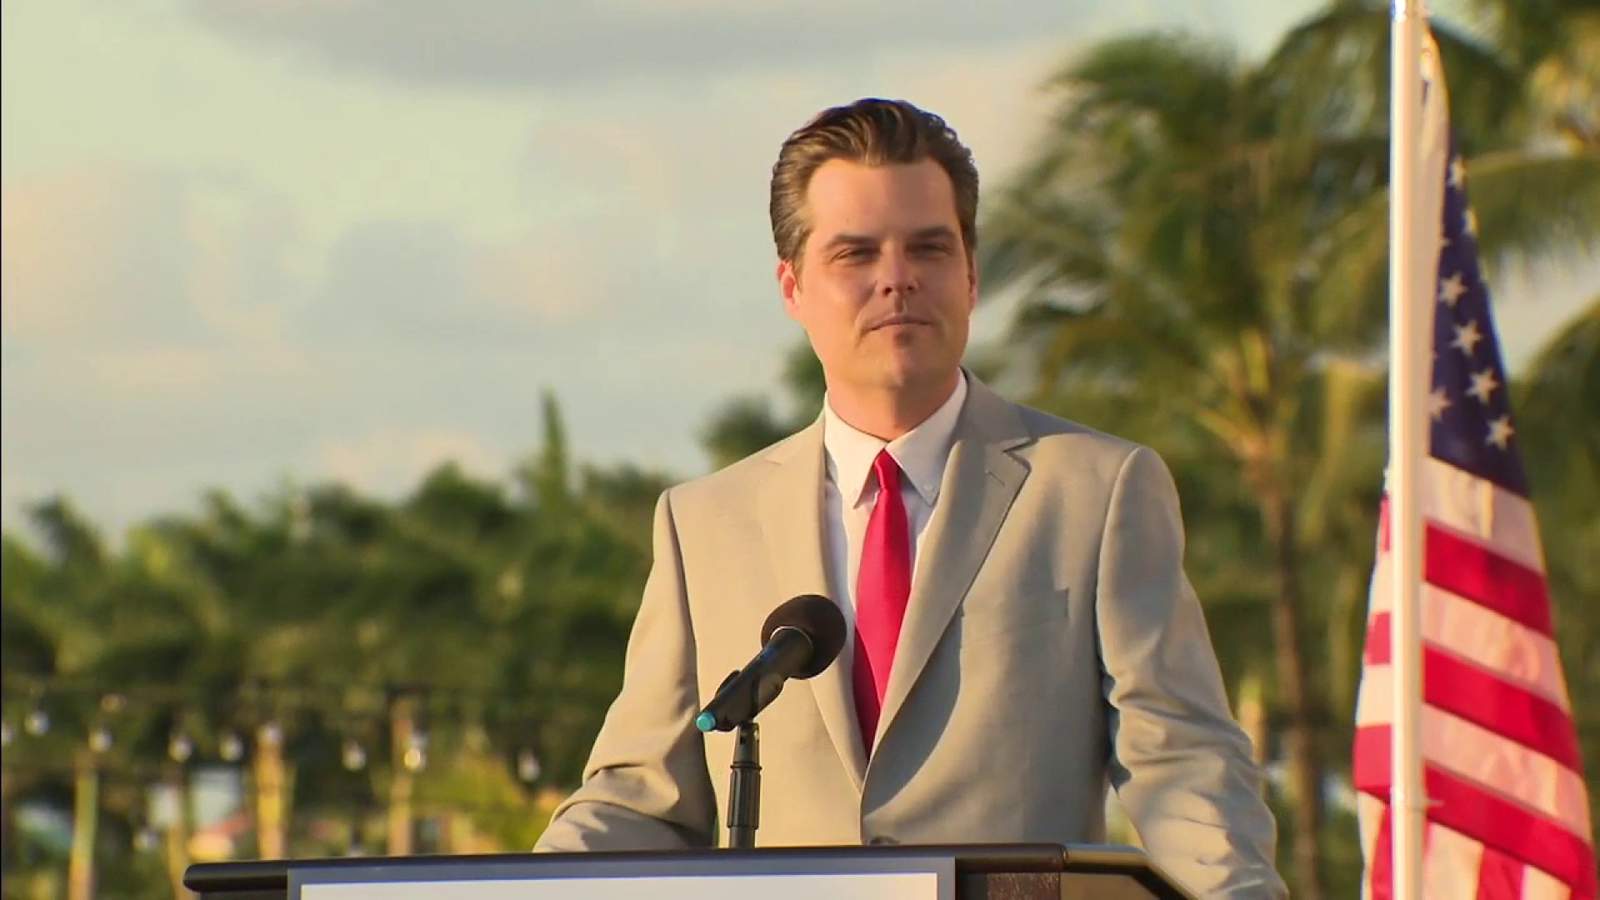 While embroiled in alleged sex scandal, Gaetz speaks to Trump supporters in Doral